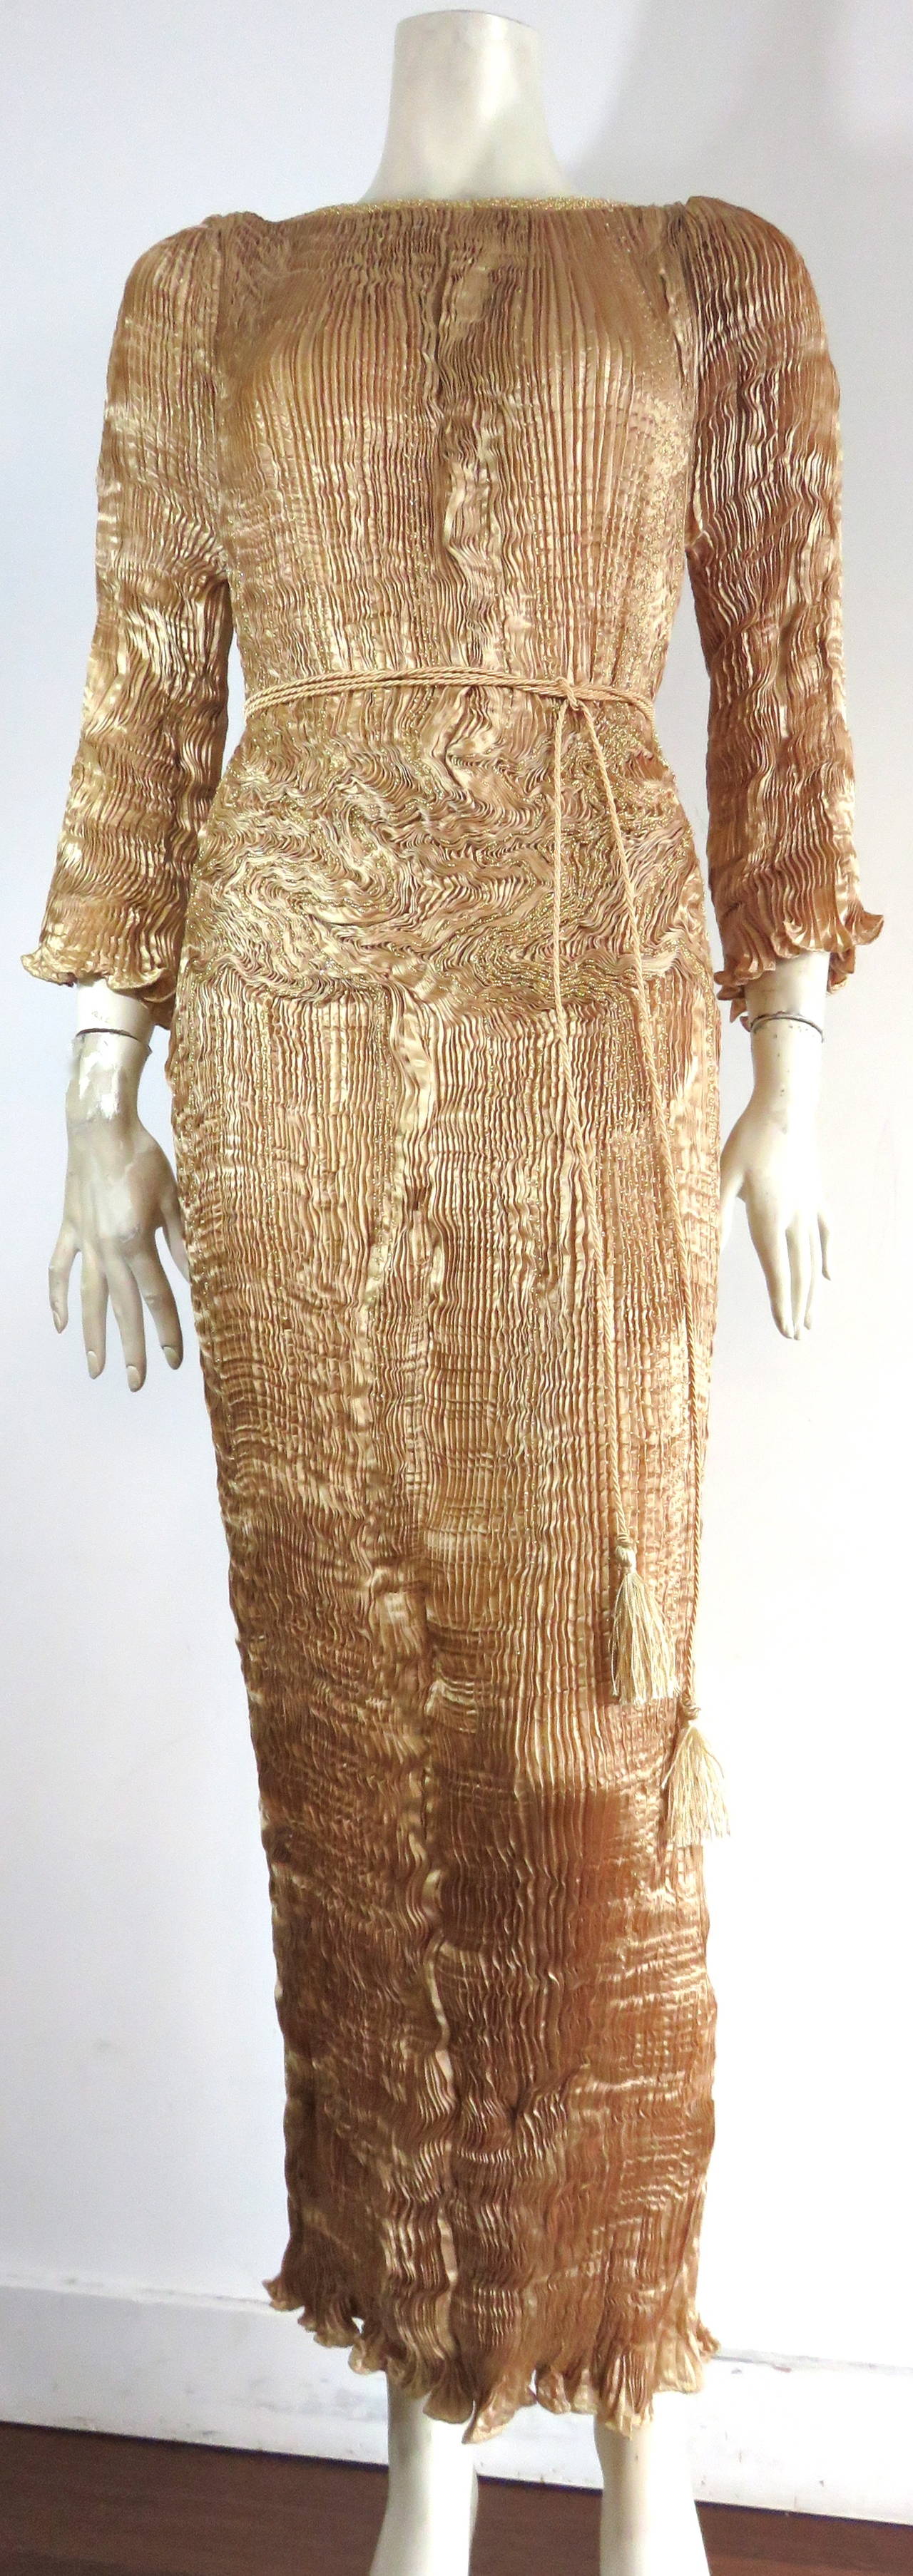 Mint condition, 1980's PATRICIA LESTER, Fortuny-pleated & beaded, 'Delphos' gown in 100% pure, golden silk.

This is really a stunning dress designed by Patricia Lester in Wales during the 1980's, inspired by Mario Fortuny.

The entire dress is